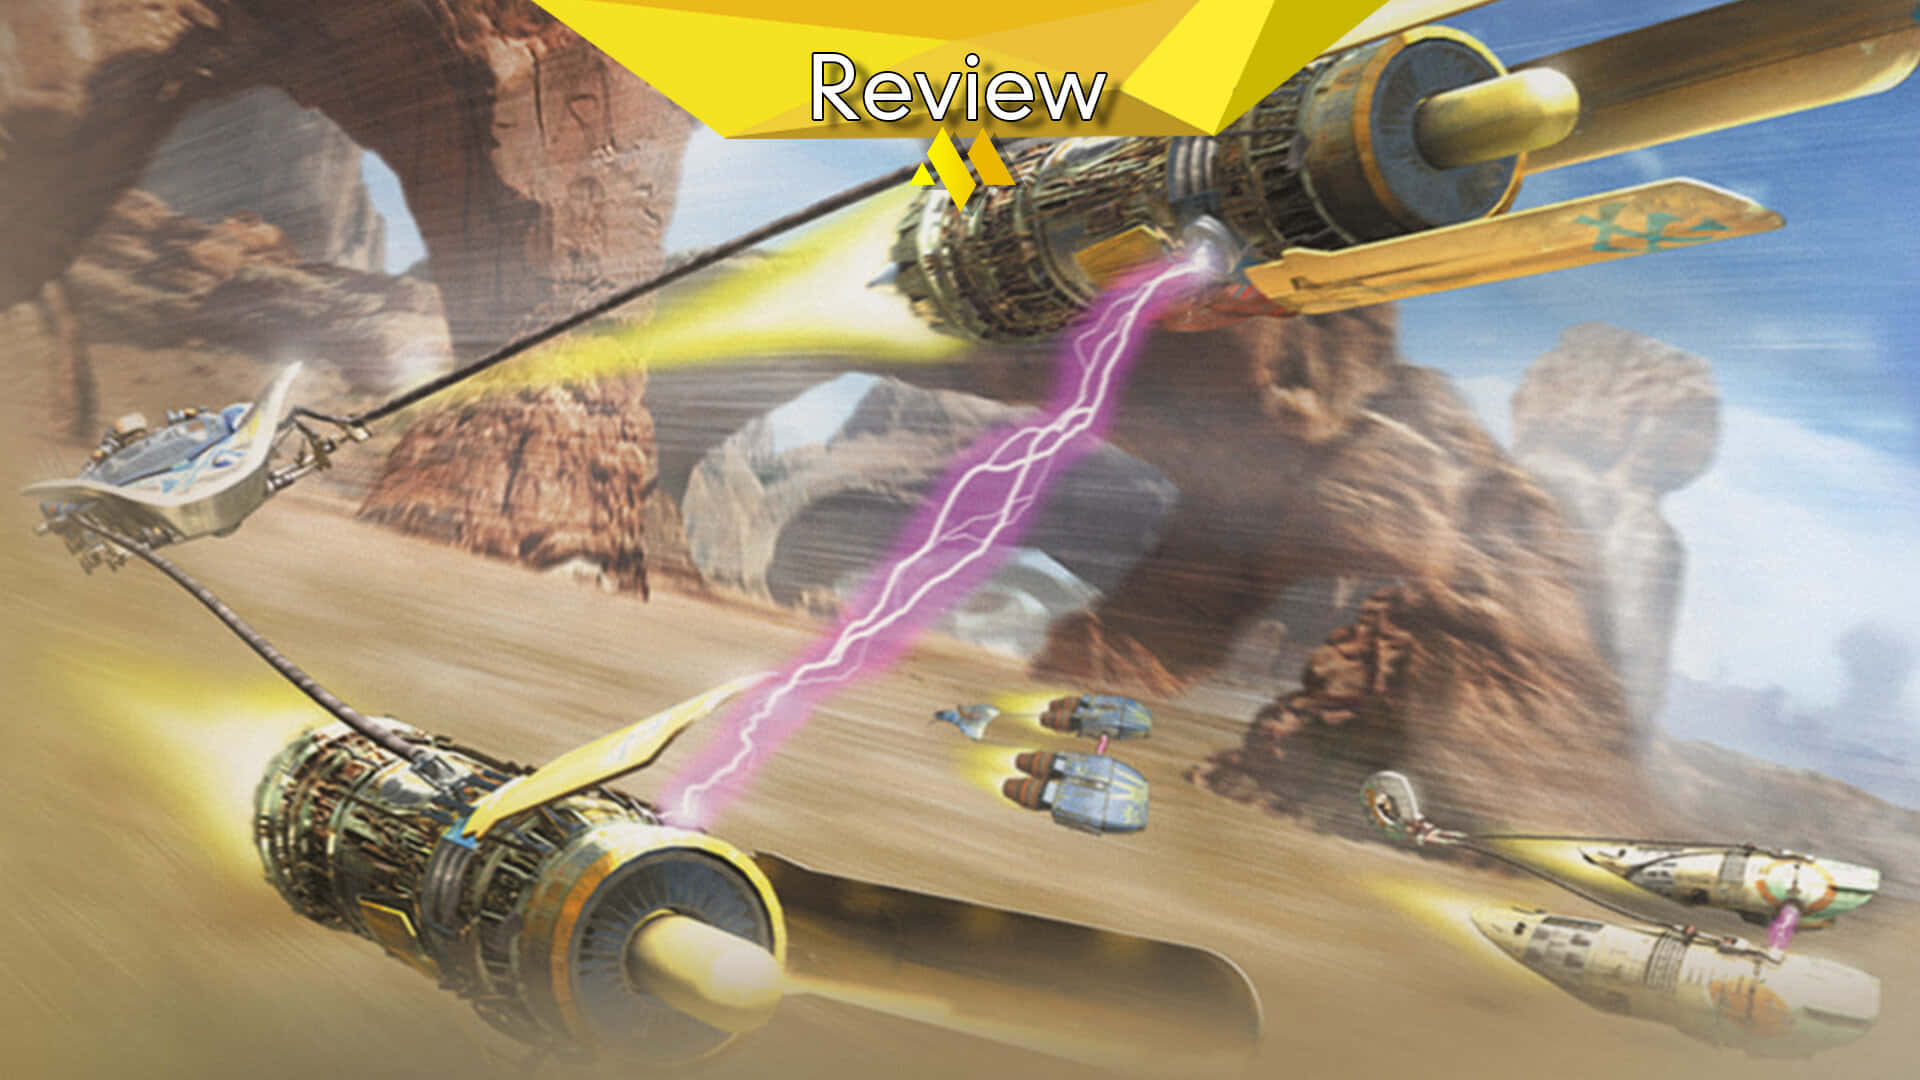 Intense Podracing Action In The Star Wars Universe Wallpaper